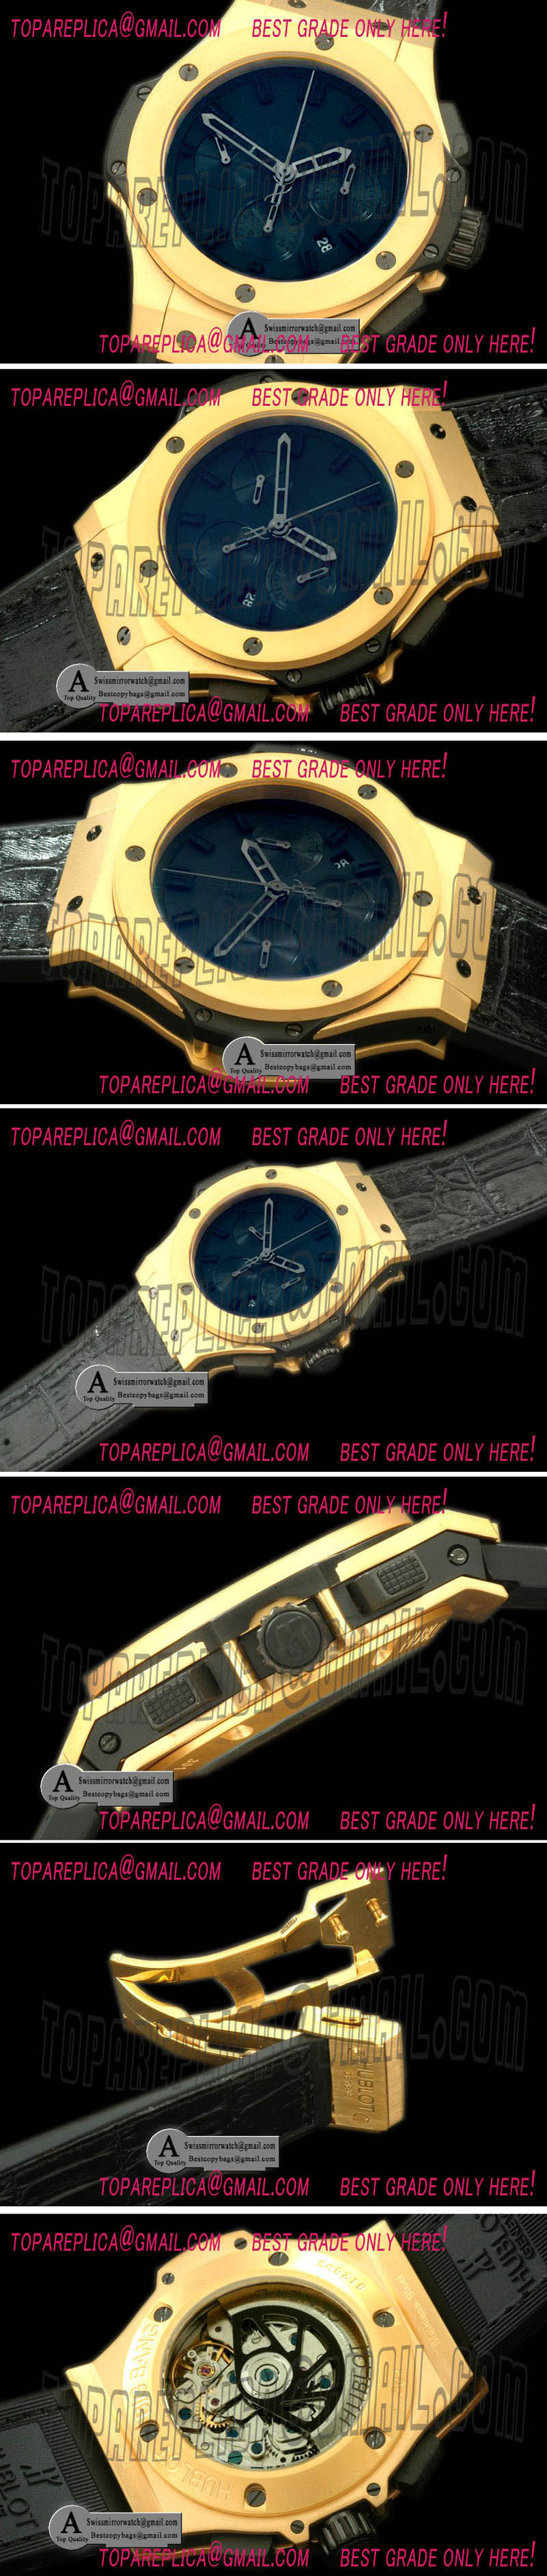 Hublot Cermet All Black Bang Yellow Gold Leather A-7750 Replica Watches